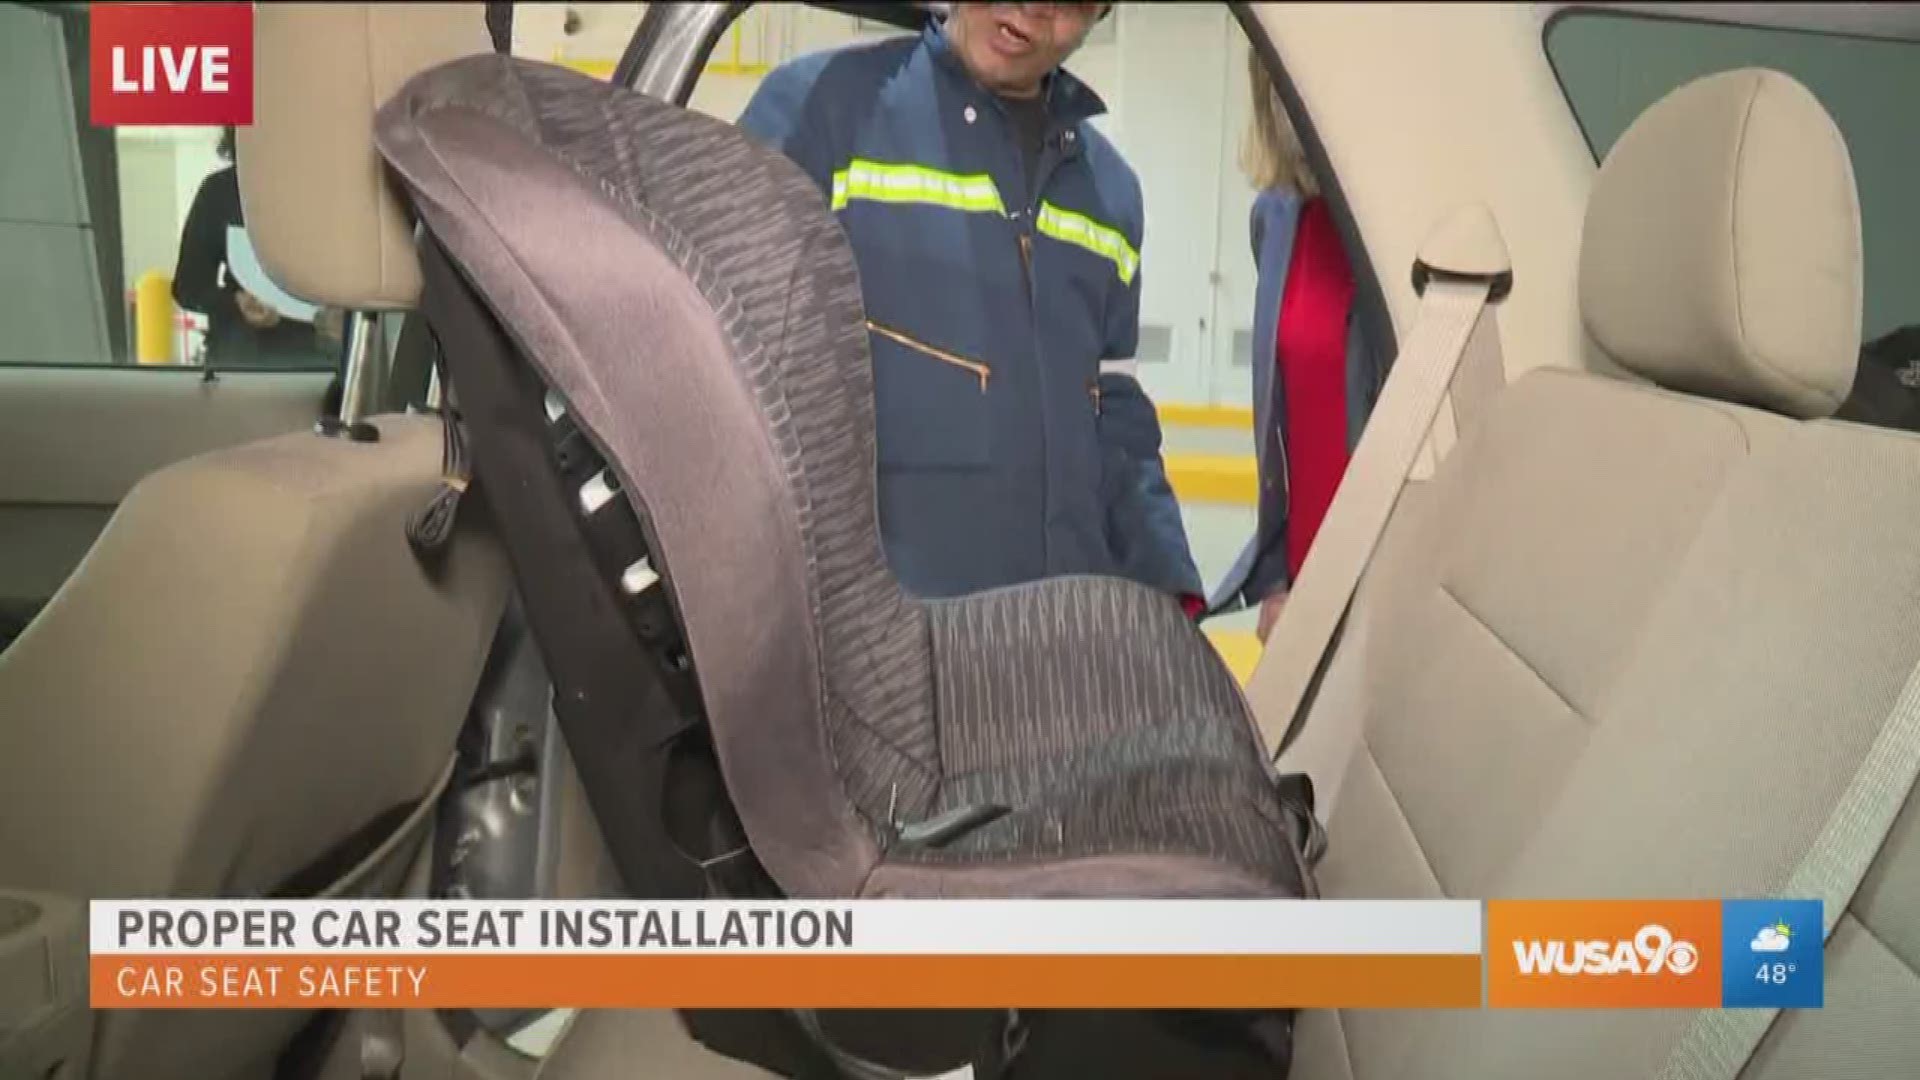 Lead DC DMV motor vehicle Inspector Larry Walker shares his story on how people don't utilize this lifesaving method for kids. Also shows you the proper way to put in a car seat.